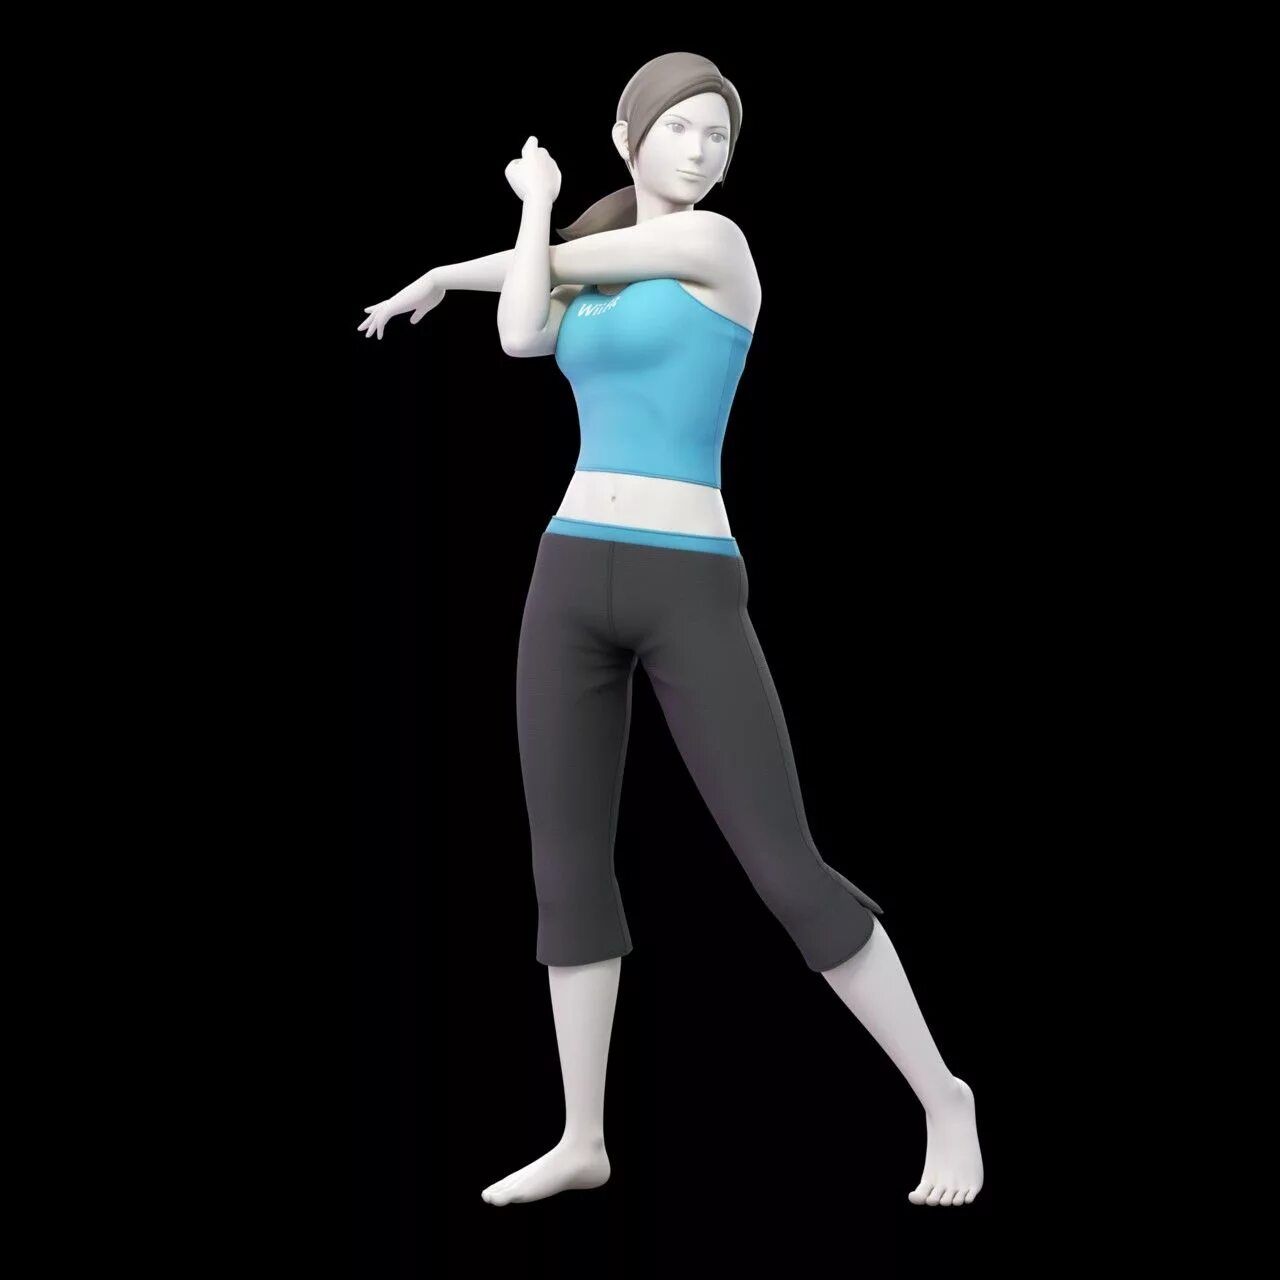 Wii fit. Wii Fit тренер. Wii Fit Trainer super Smash. Wii тренерша. Wii Fit Trainer Smash Bros Ultimate.